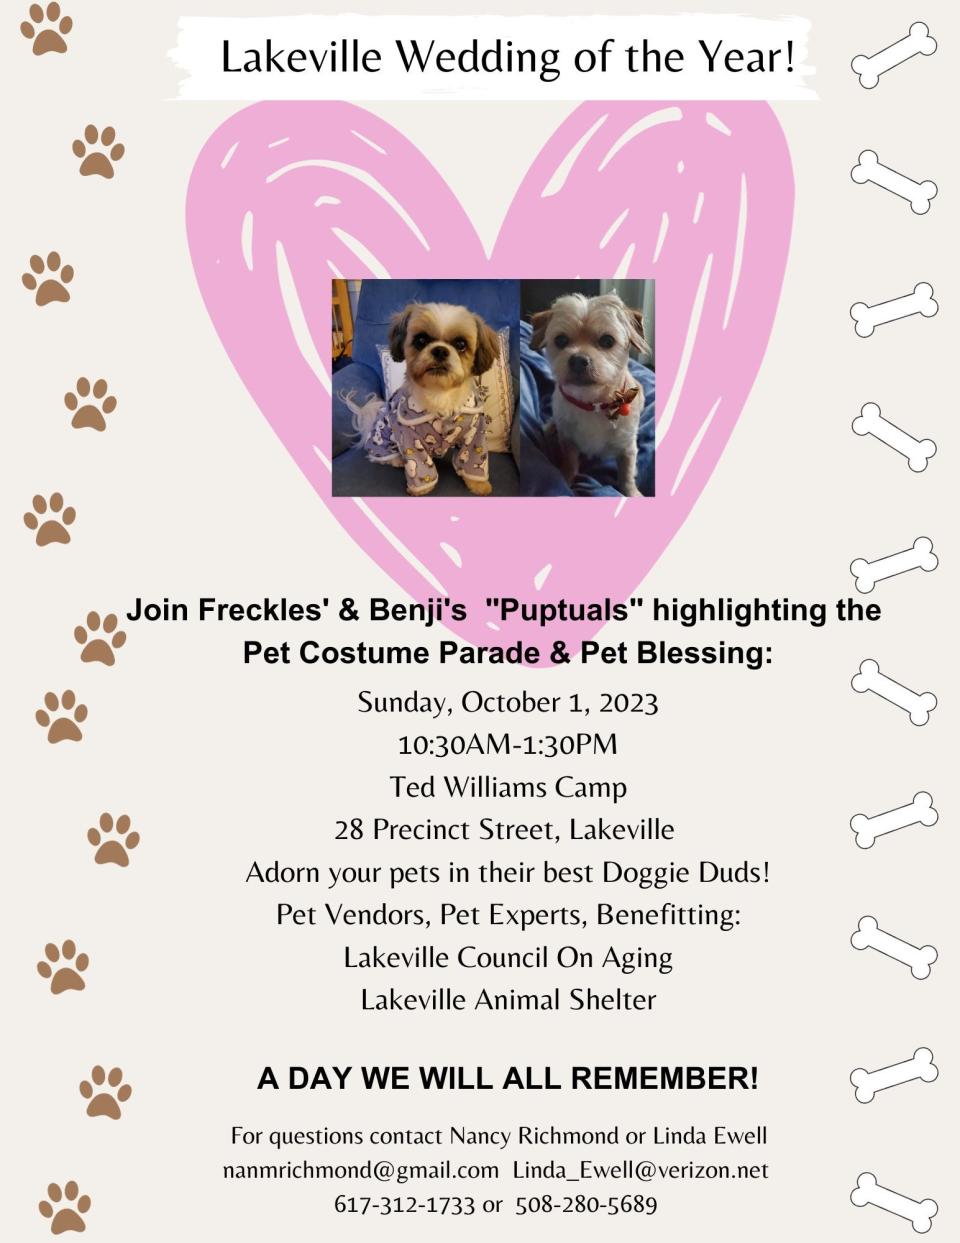 Doggy wedding: The fundraising event will be held October 1st, from 10:30 a.m. to 1:30 p.m. at Ted Williams Camp in Lakeville.